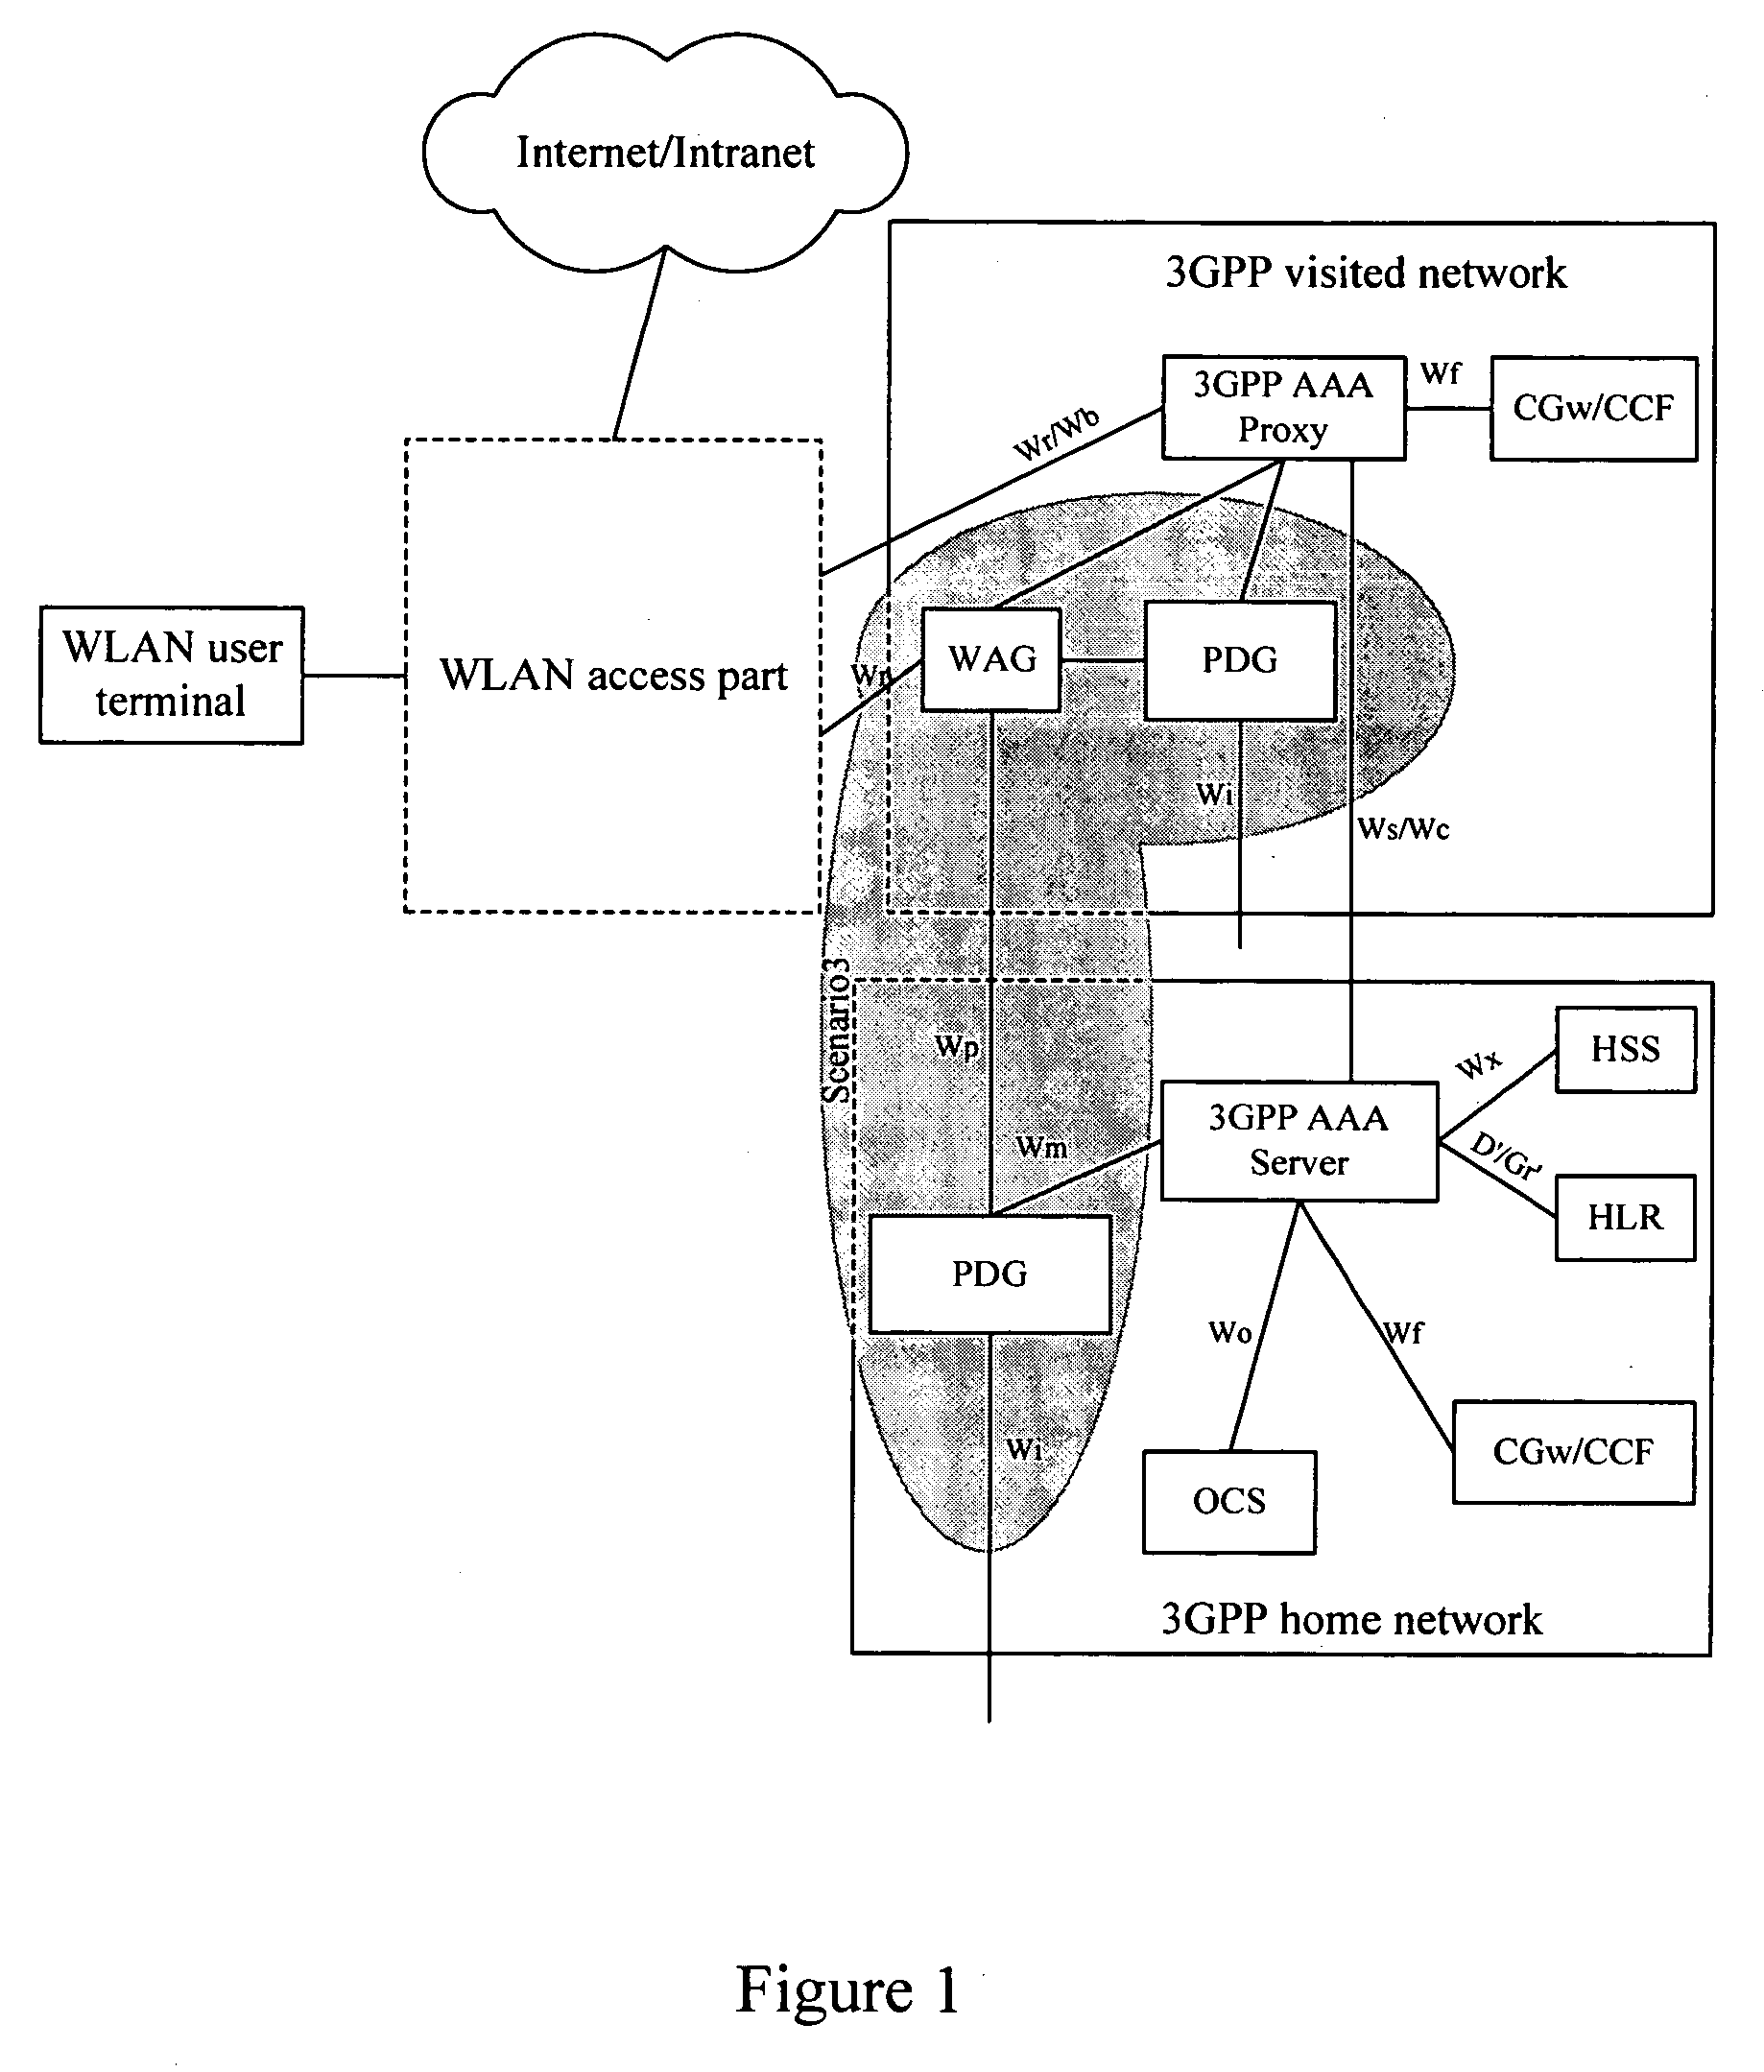 Method for establishment of a service tunnel in a WLAN